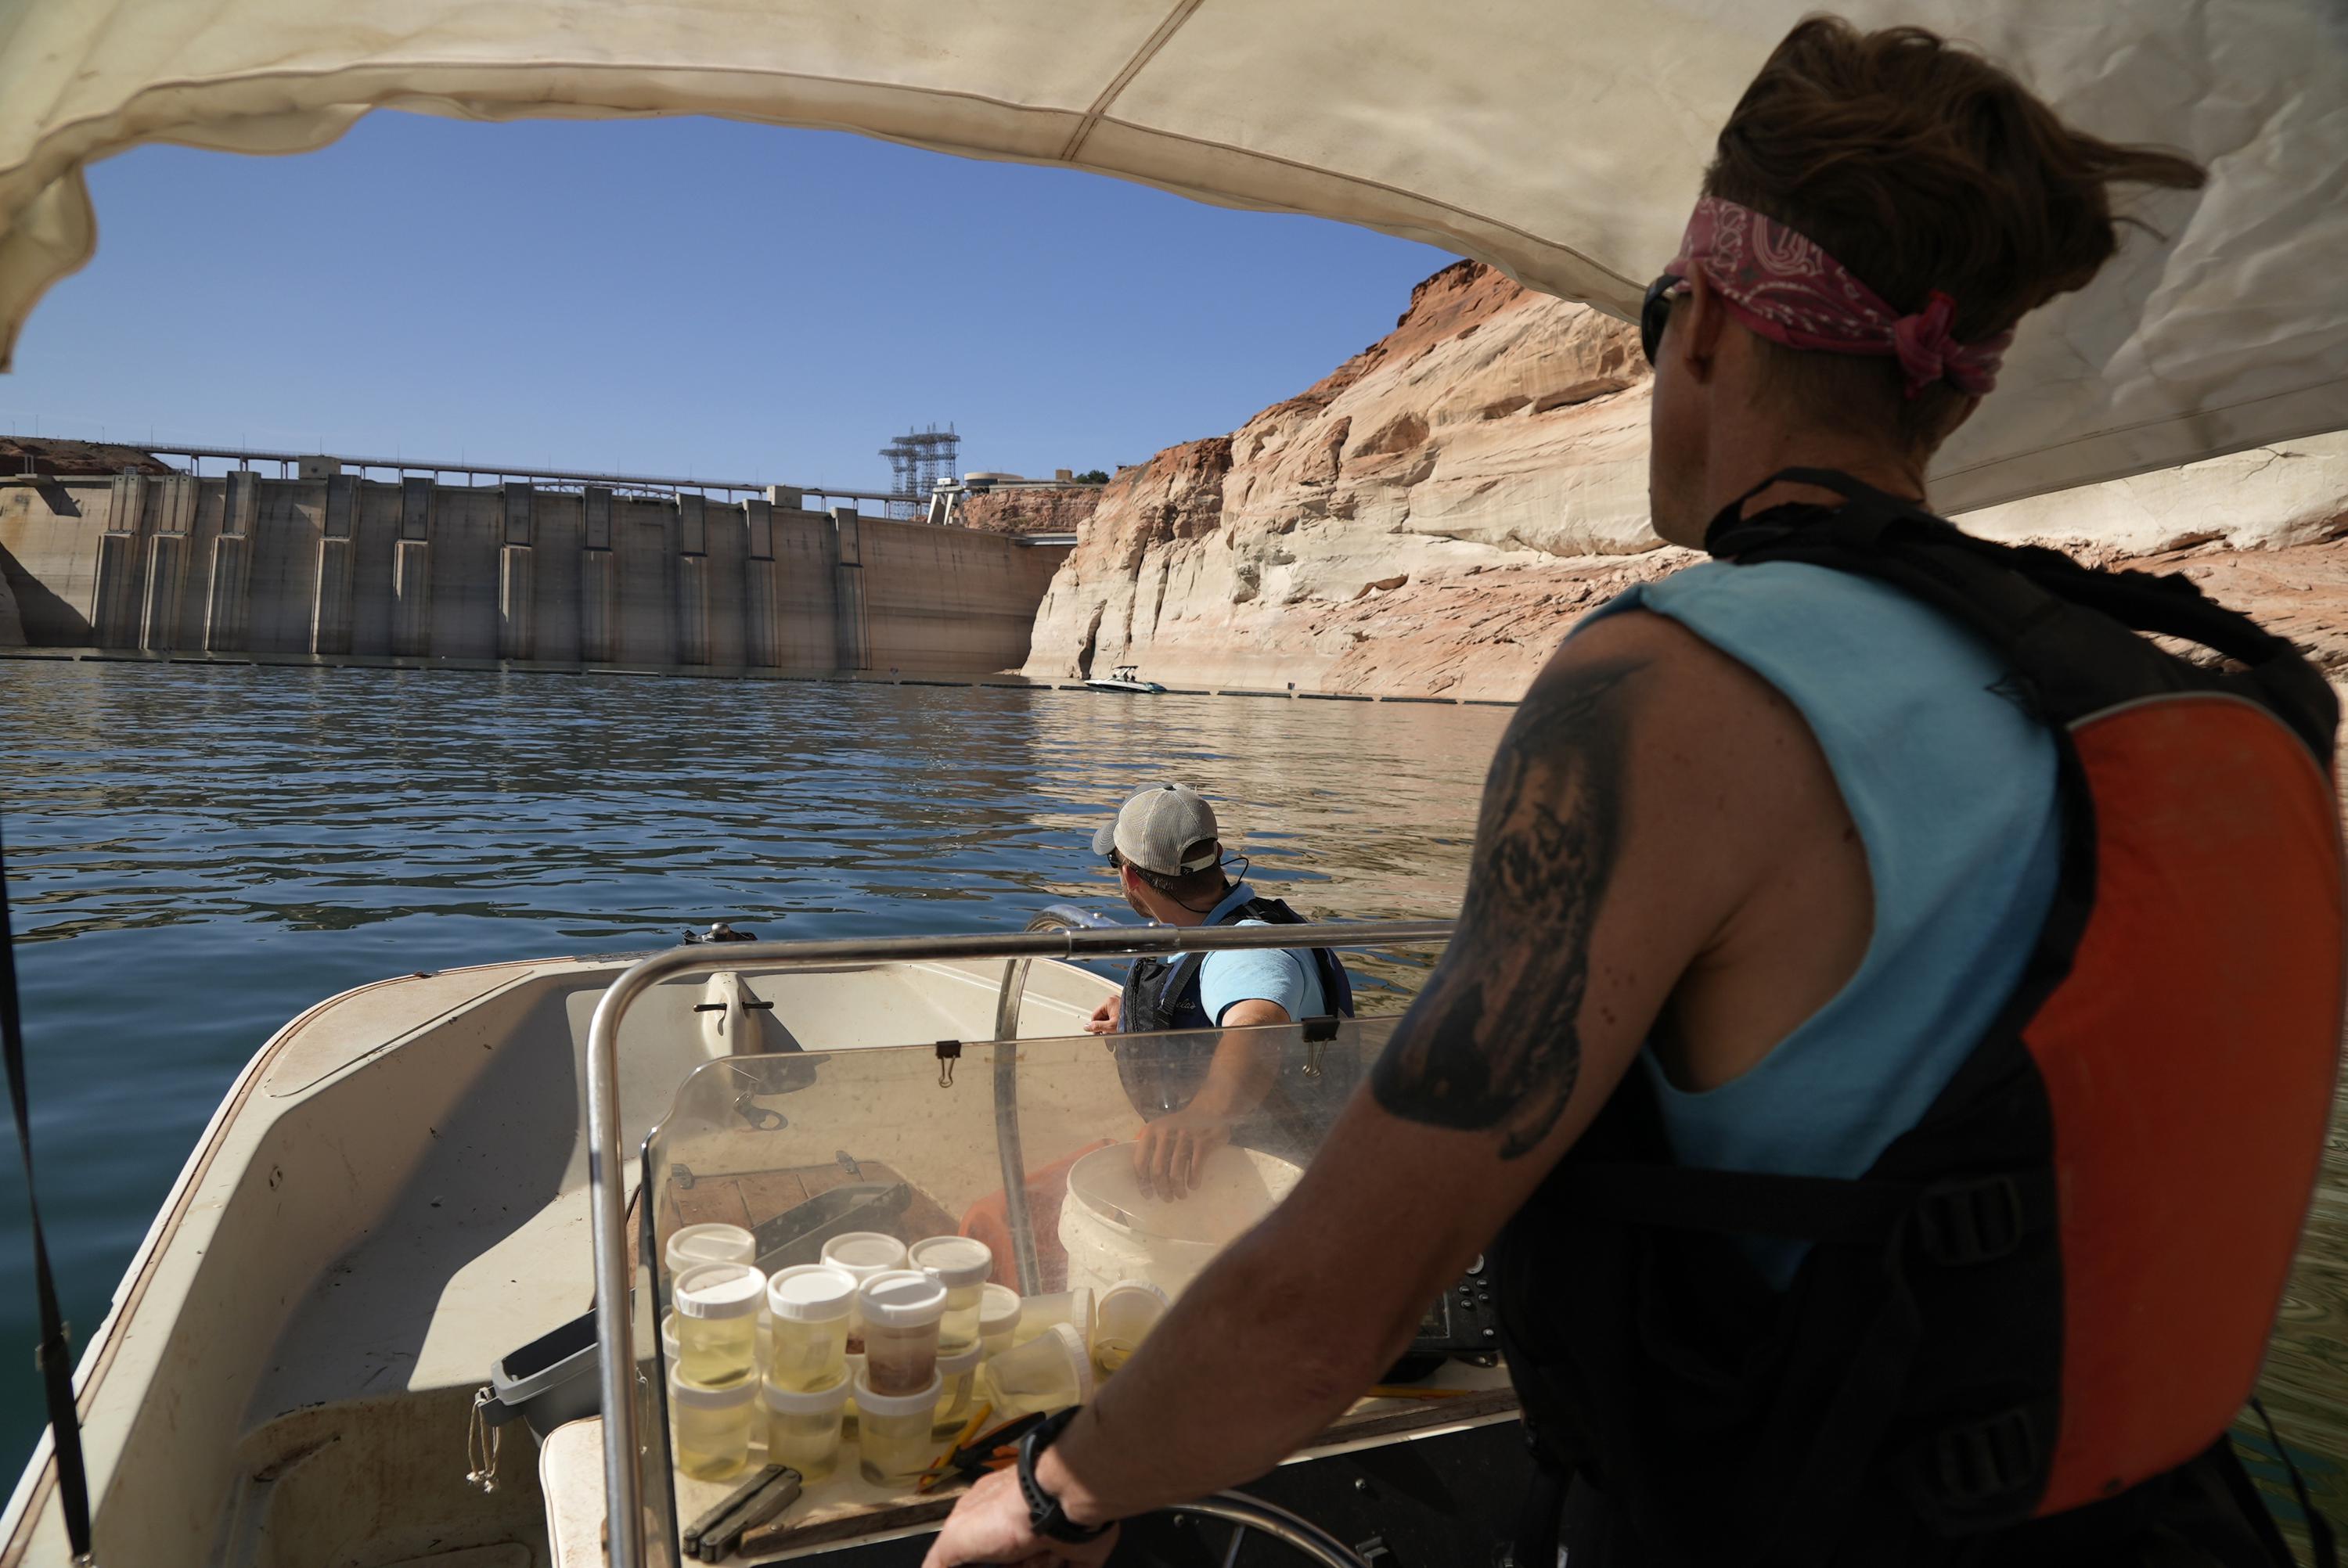 In Arizona, worry about access to Colorado River water